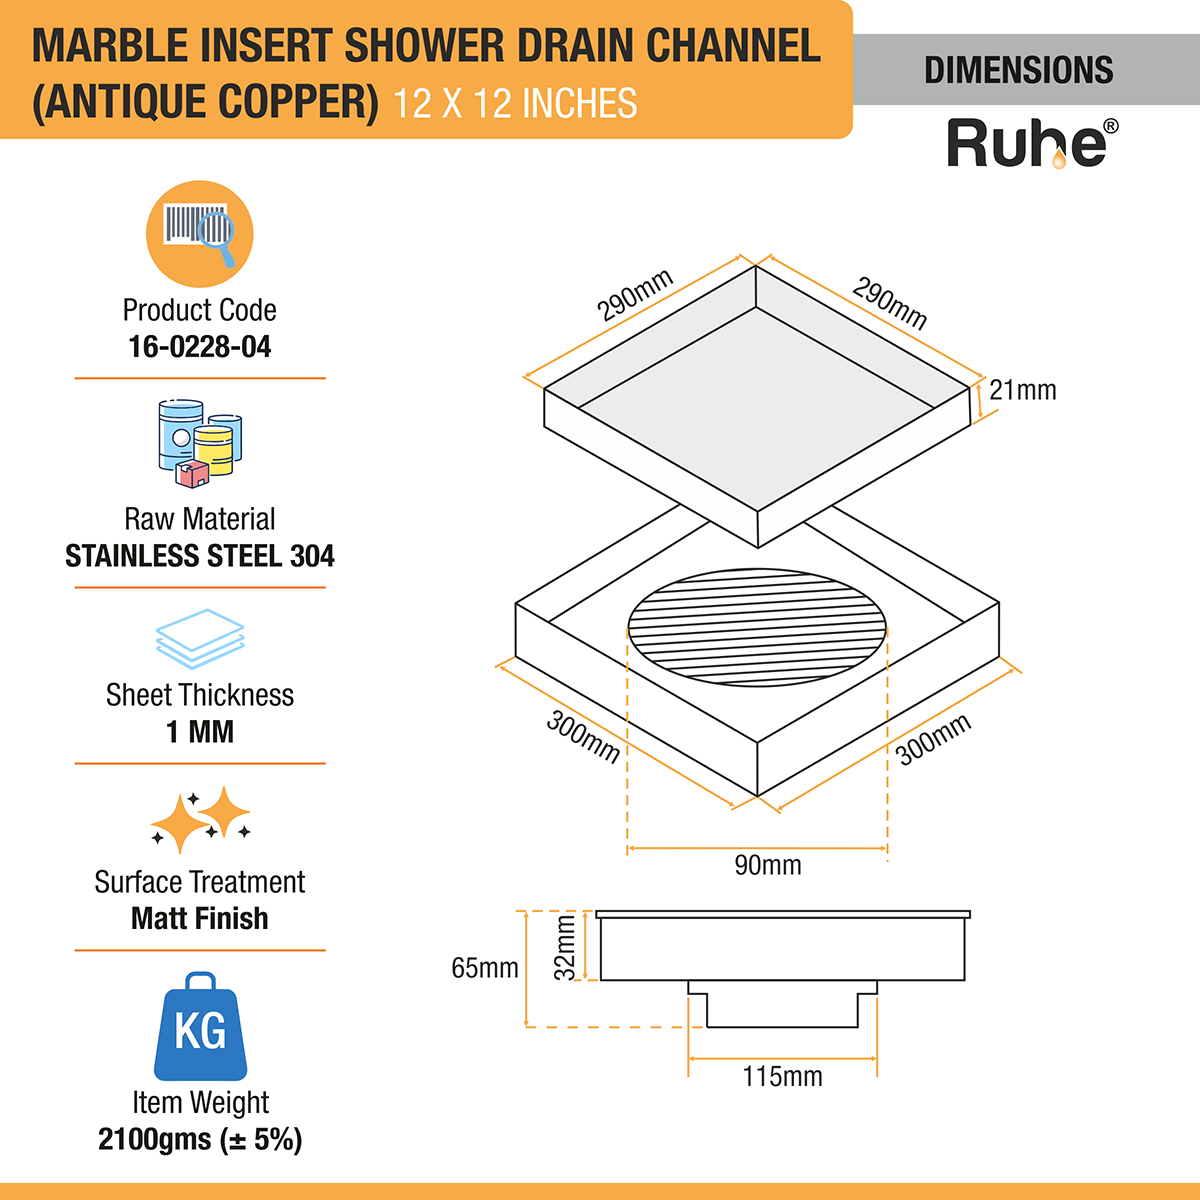 Marble Insert Shower Drain Channel (12 x 12 Inches) ROSE GOLD/ ANTIQUE COPPER dimensions and size